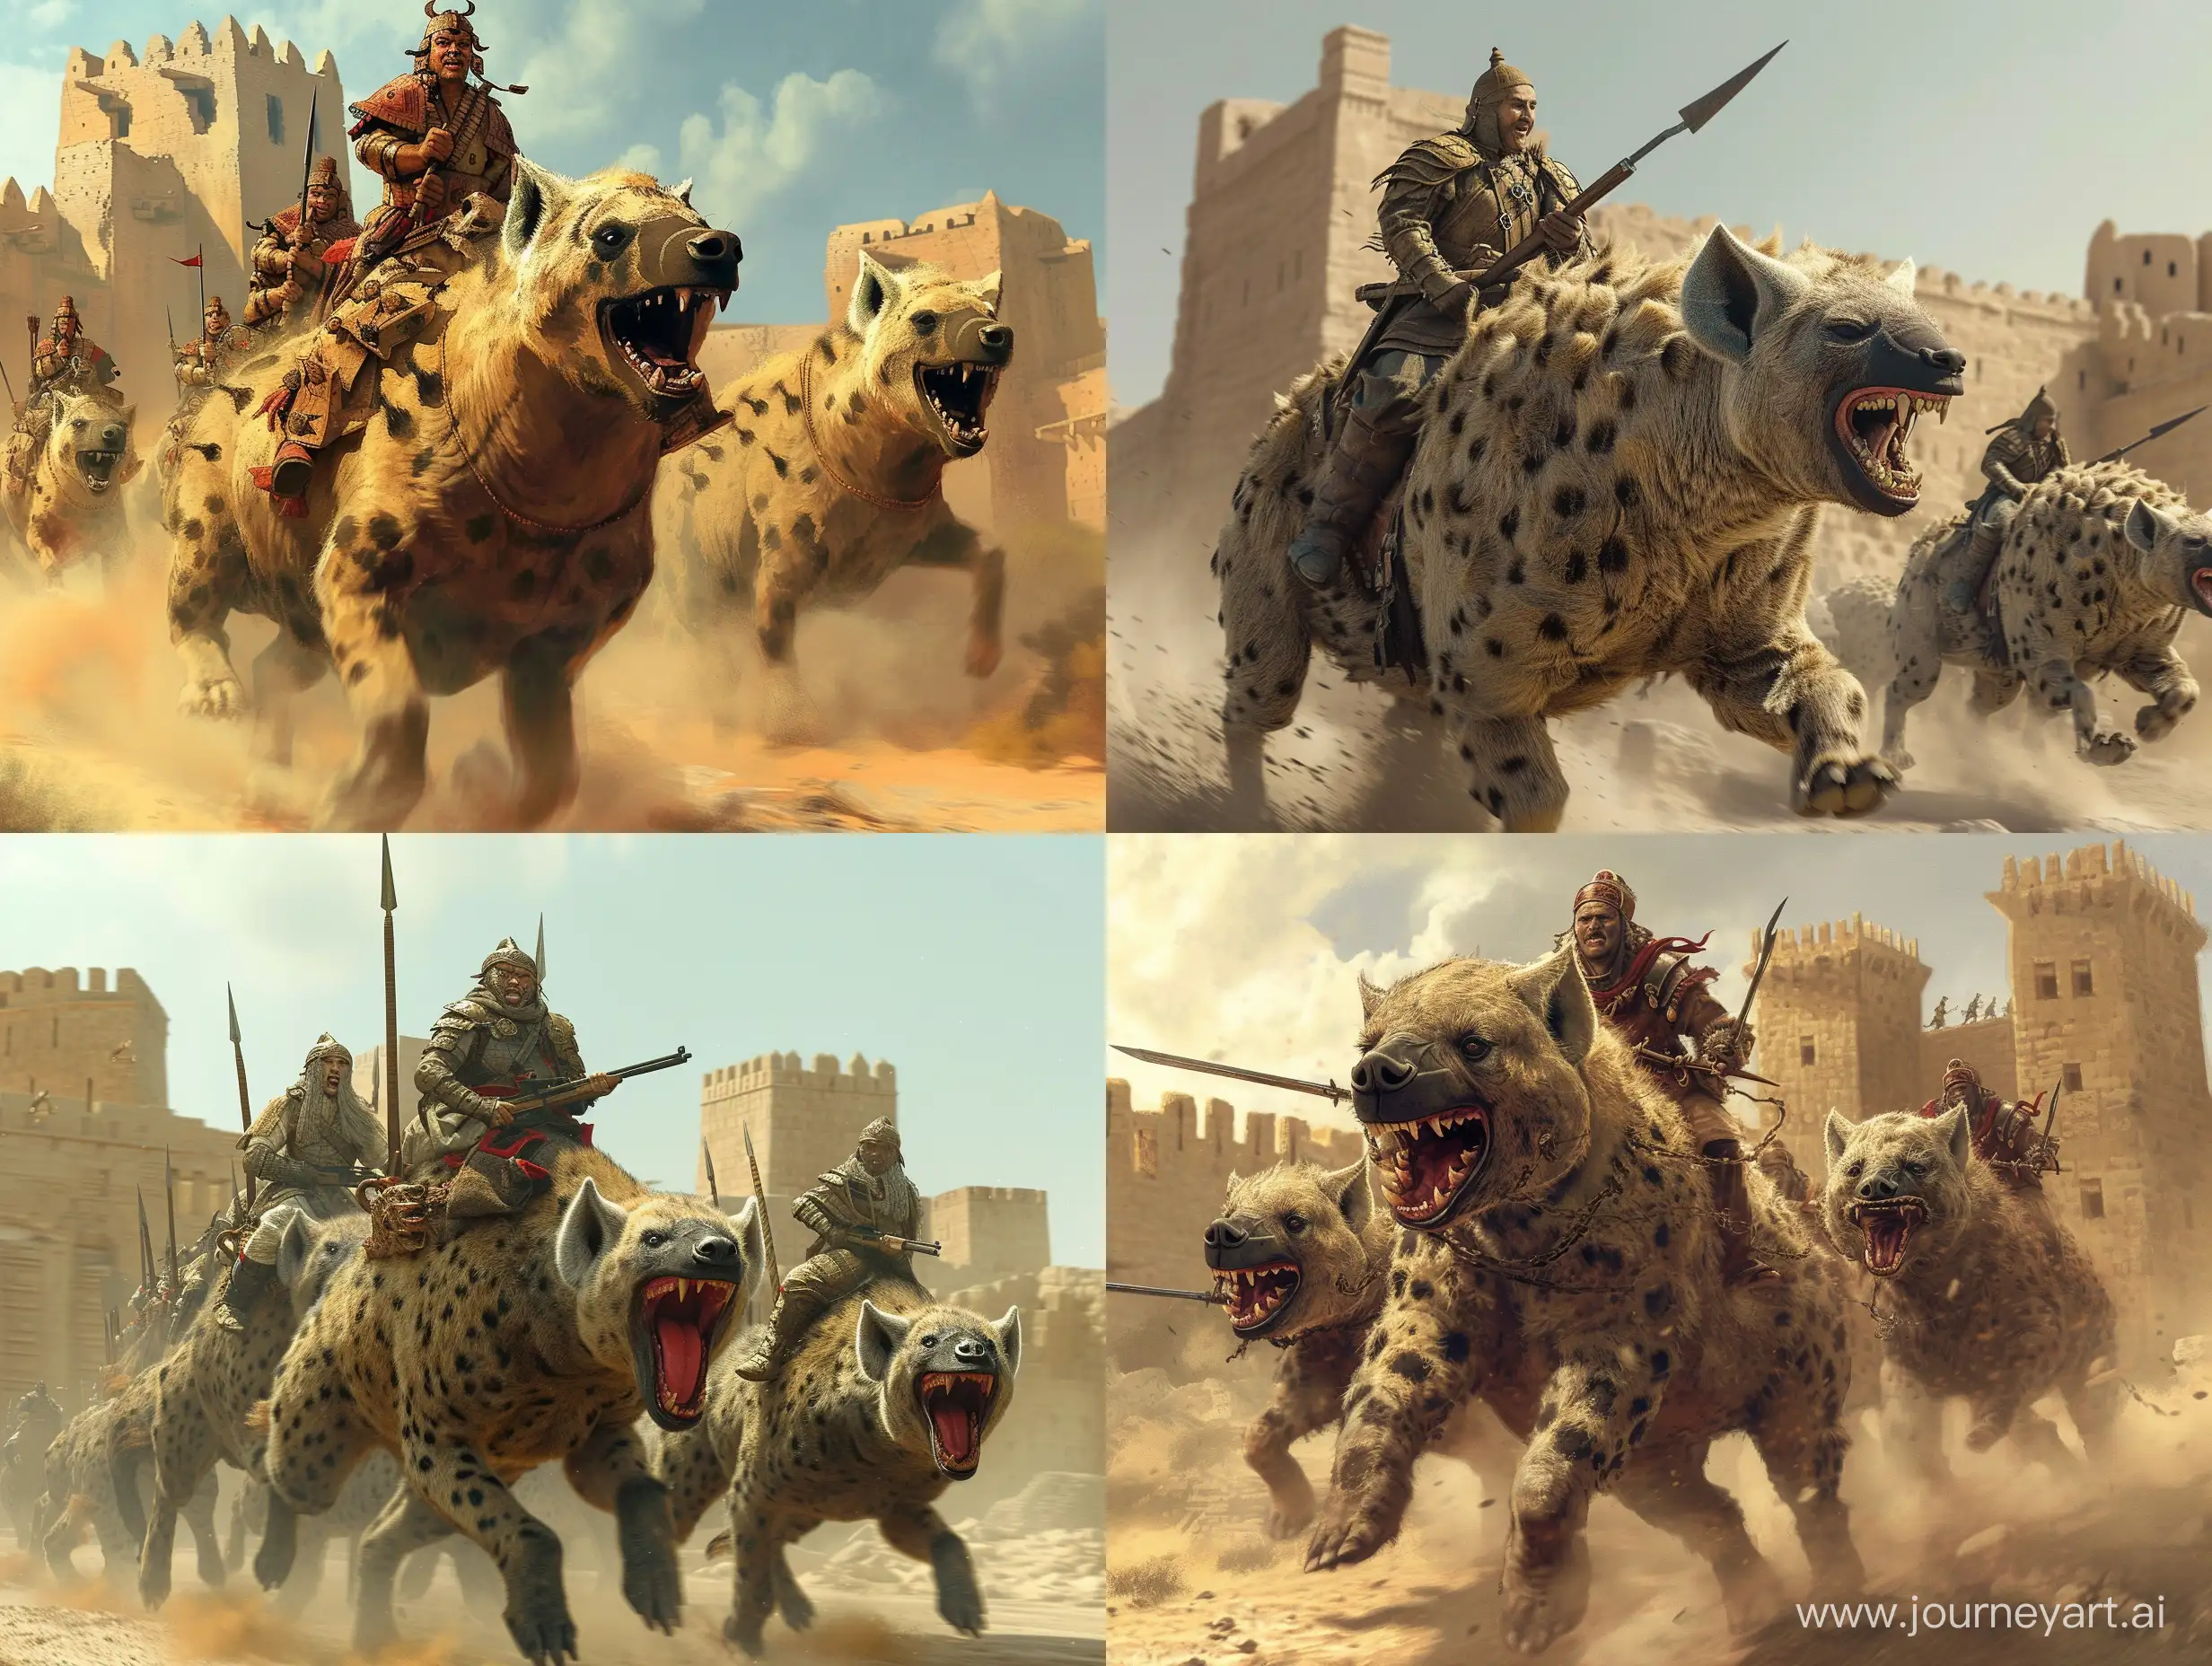 Mongol soldiers are attacking the ancient city of Arg Bam in the Persian Empire, riding on giant, scary and smiling hyenas.